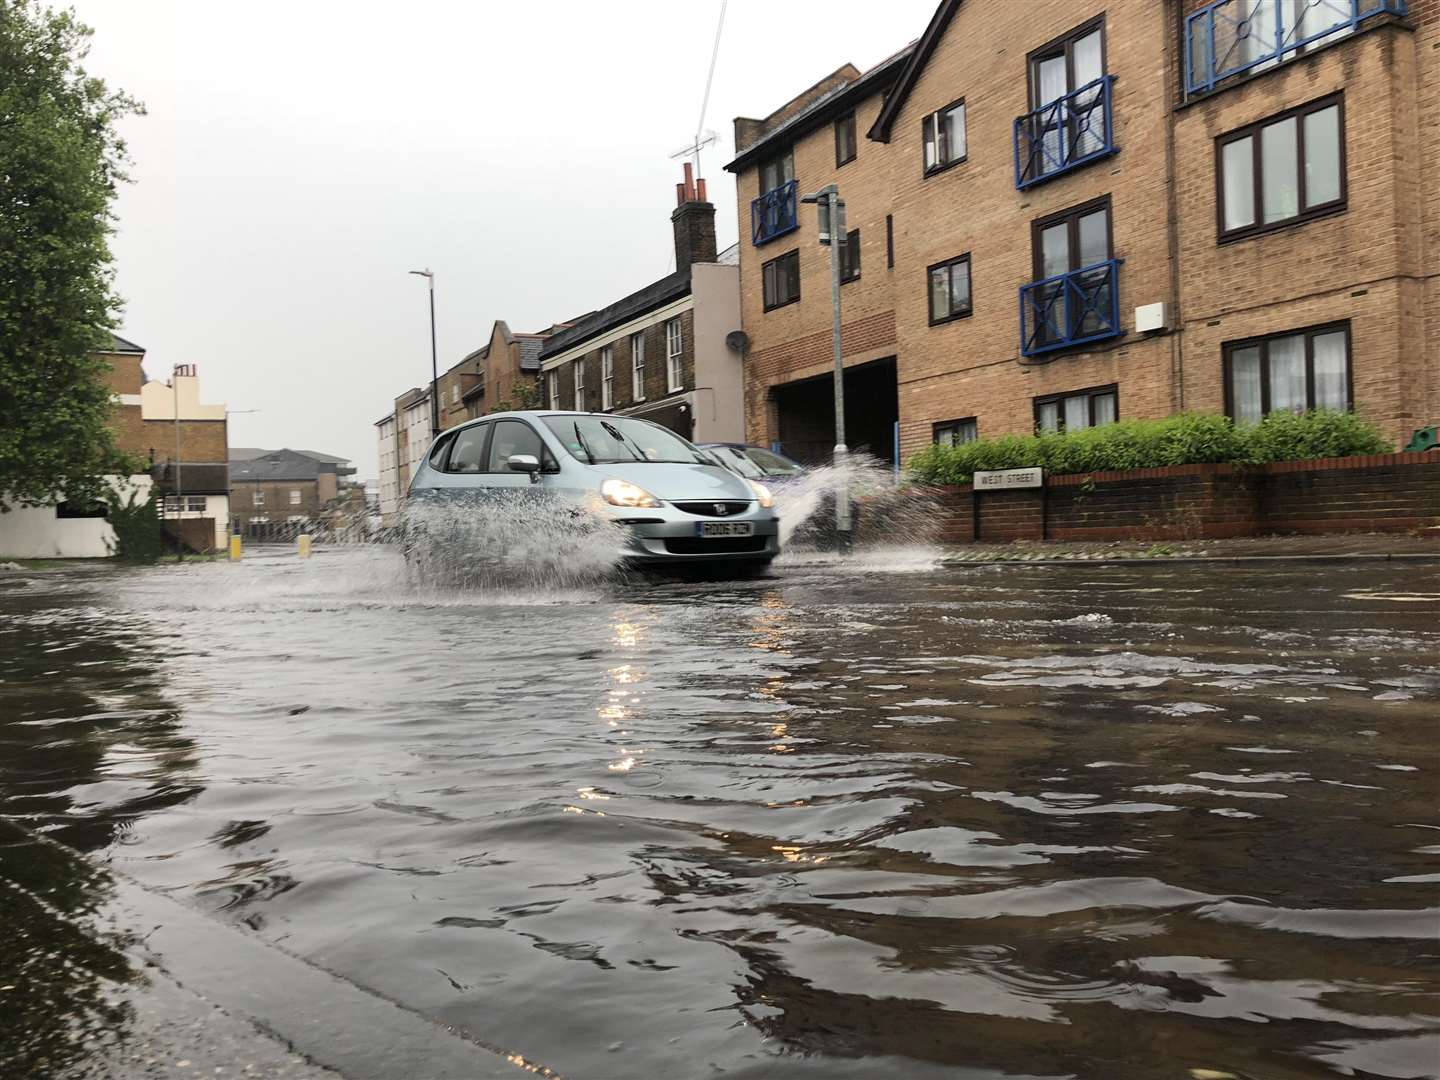 Flooding in Gravesend earlier this year